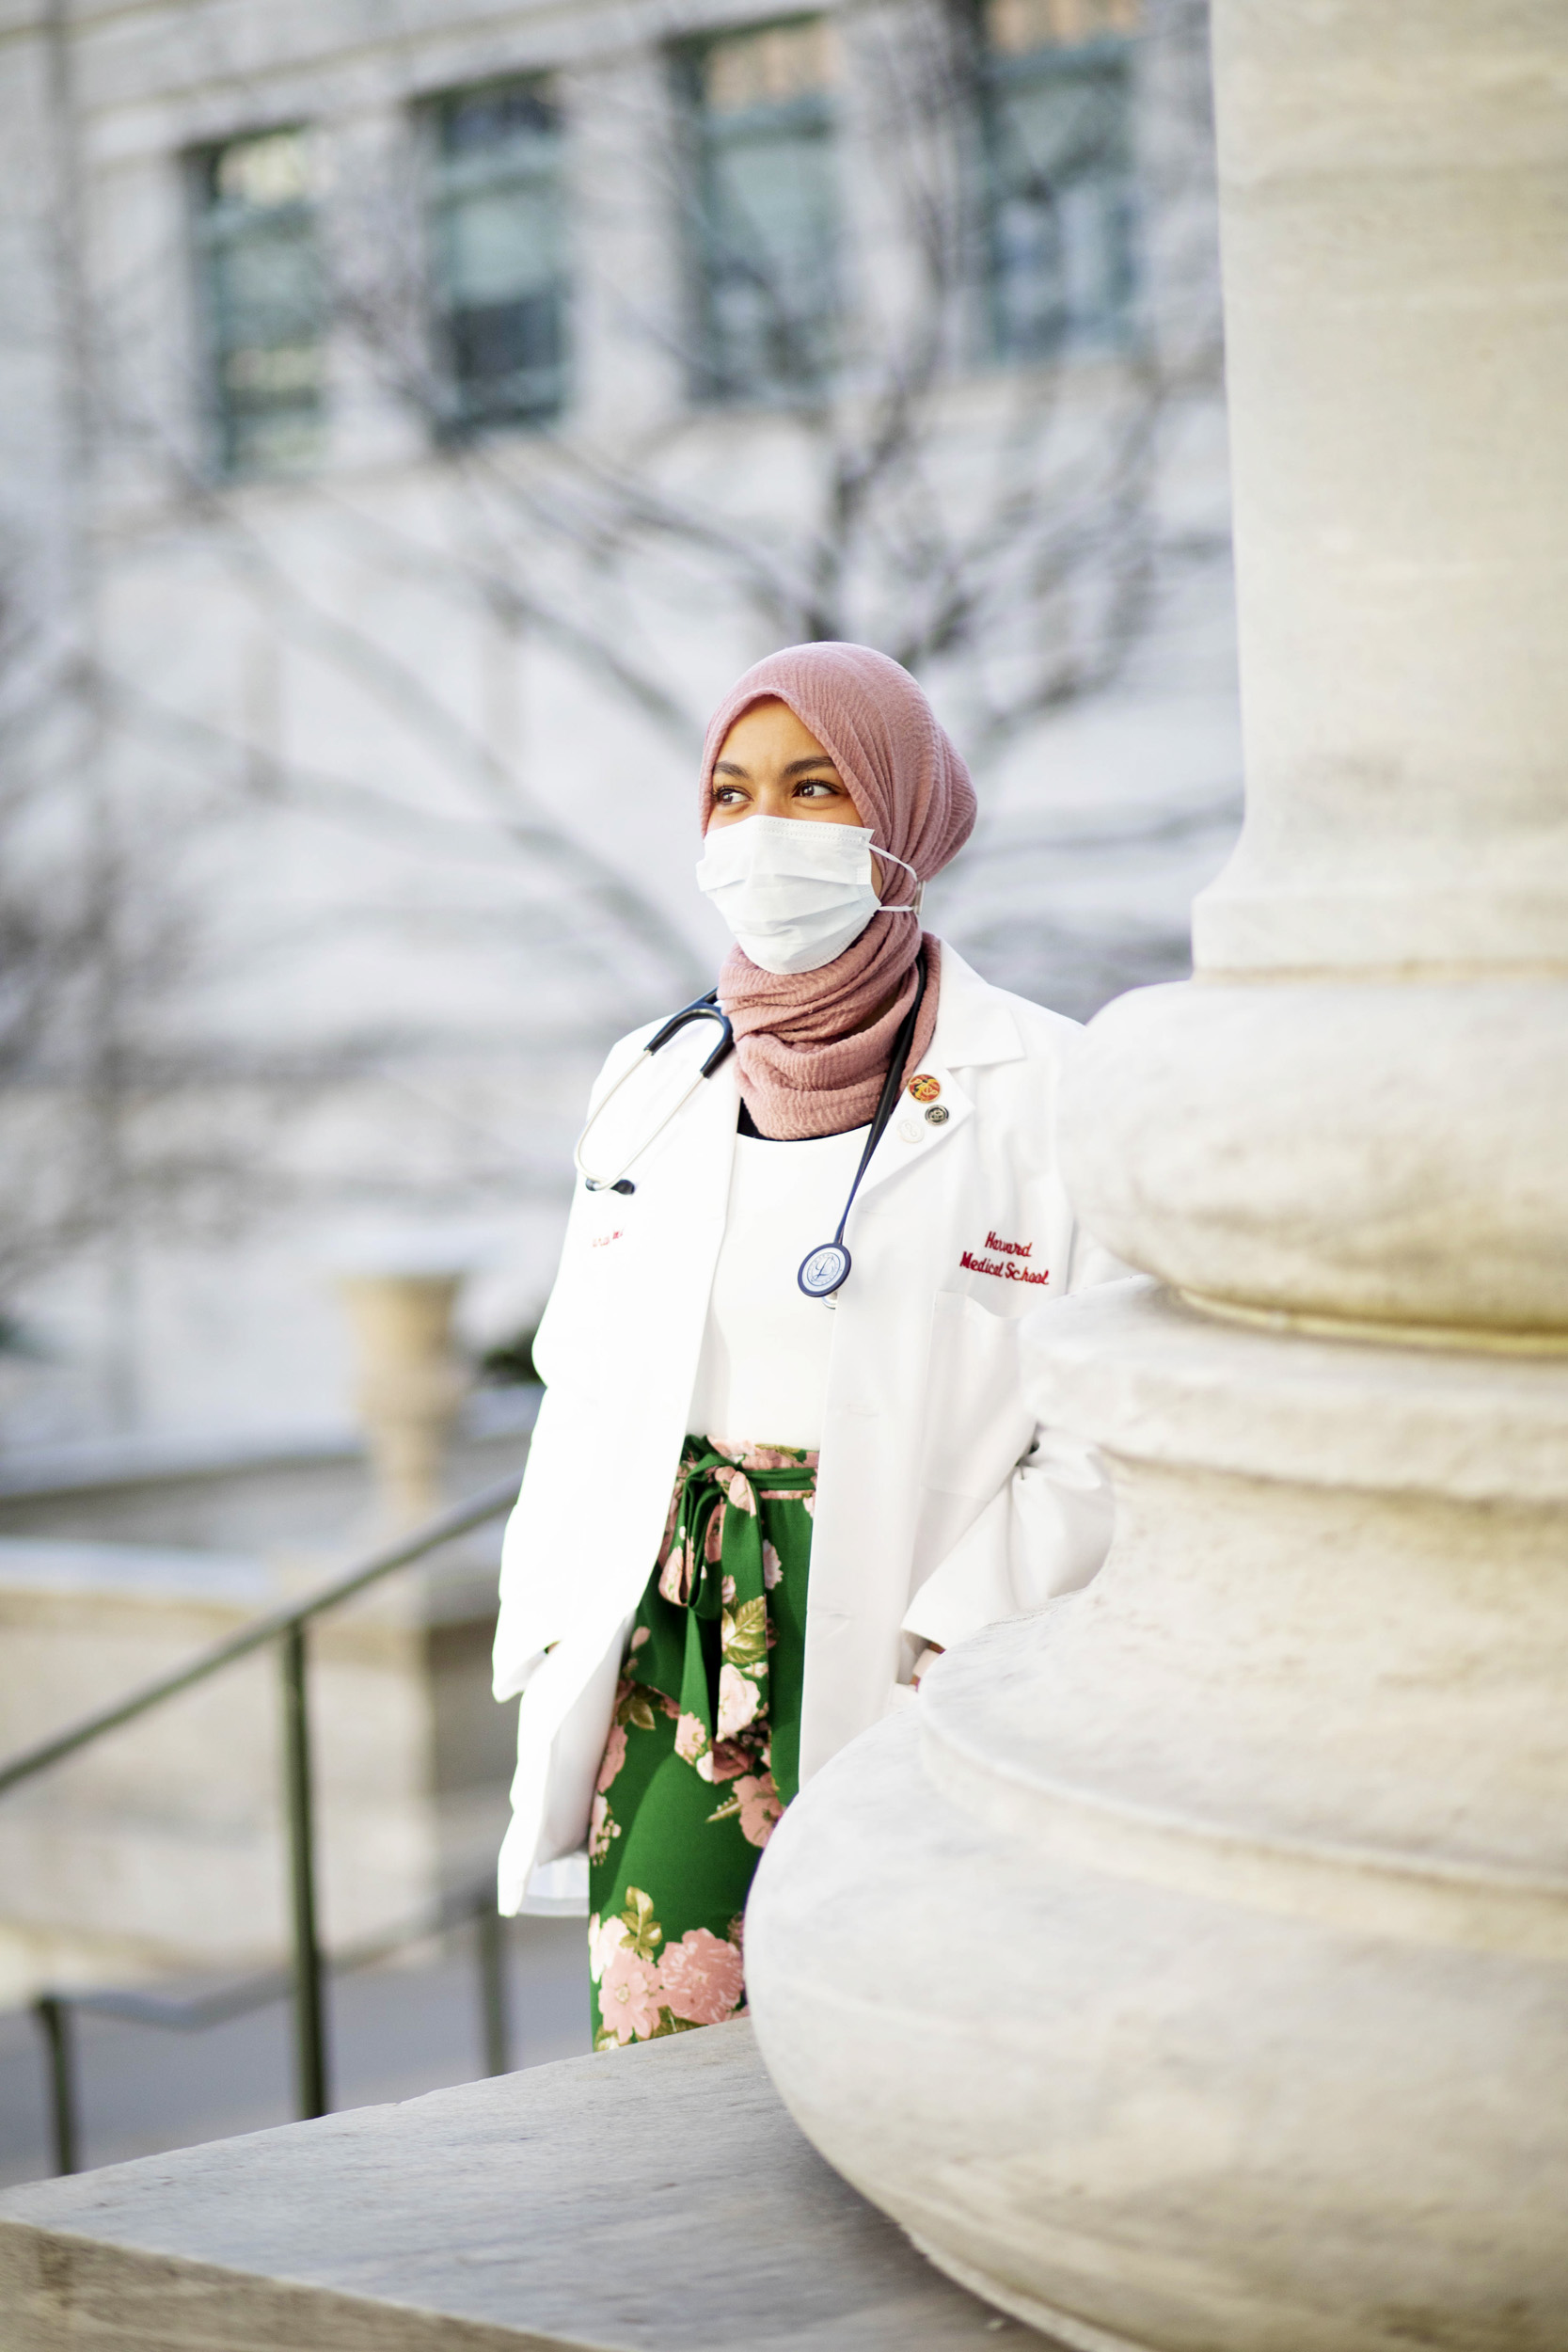 Harvard University Medical School student Sarah Ahmed is pictured.